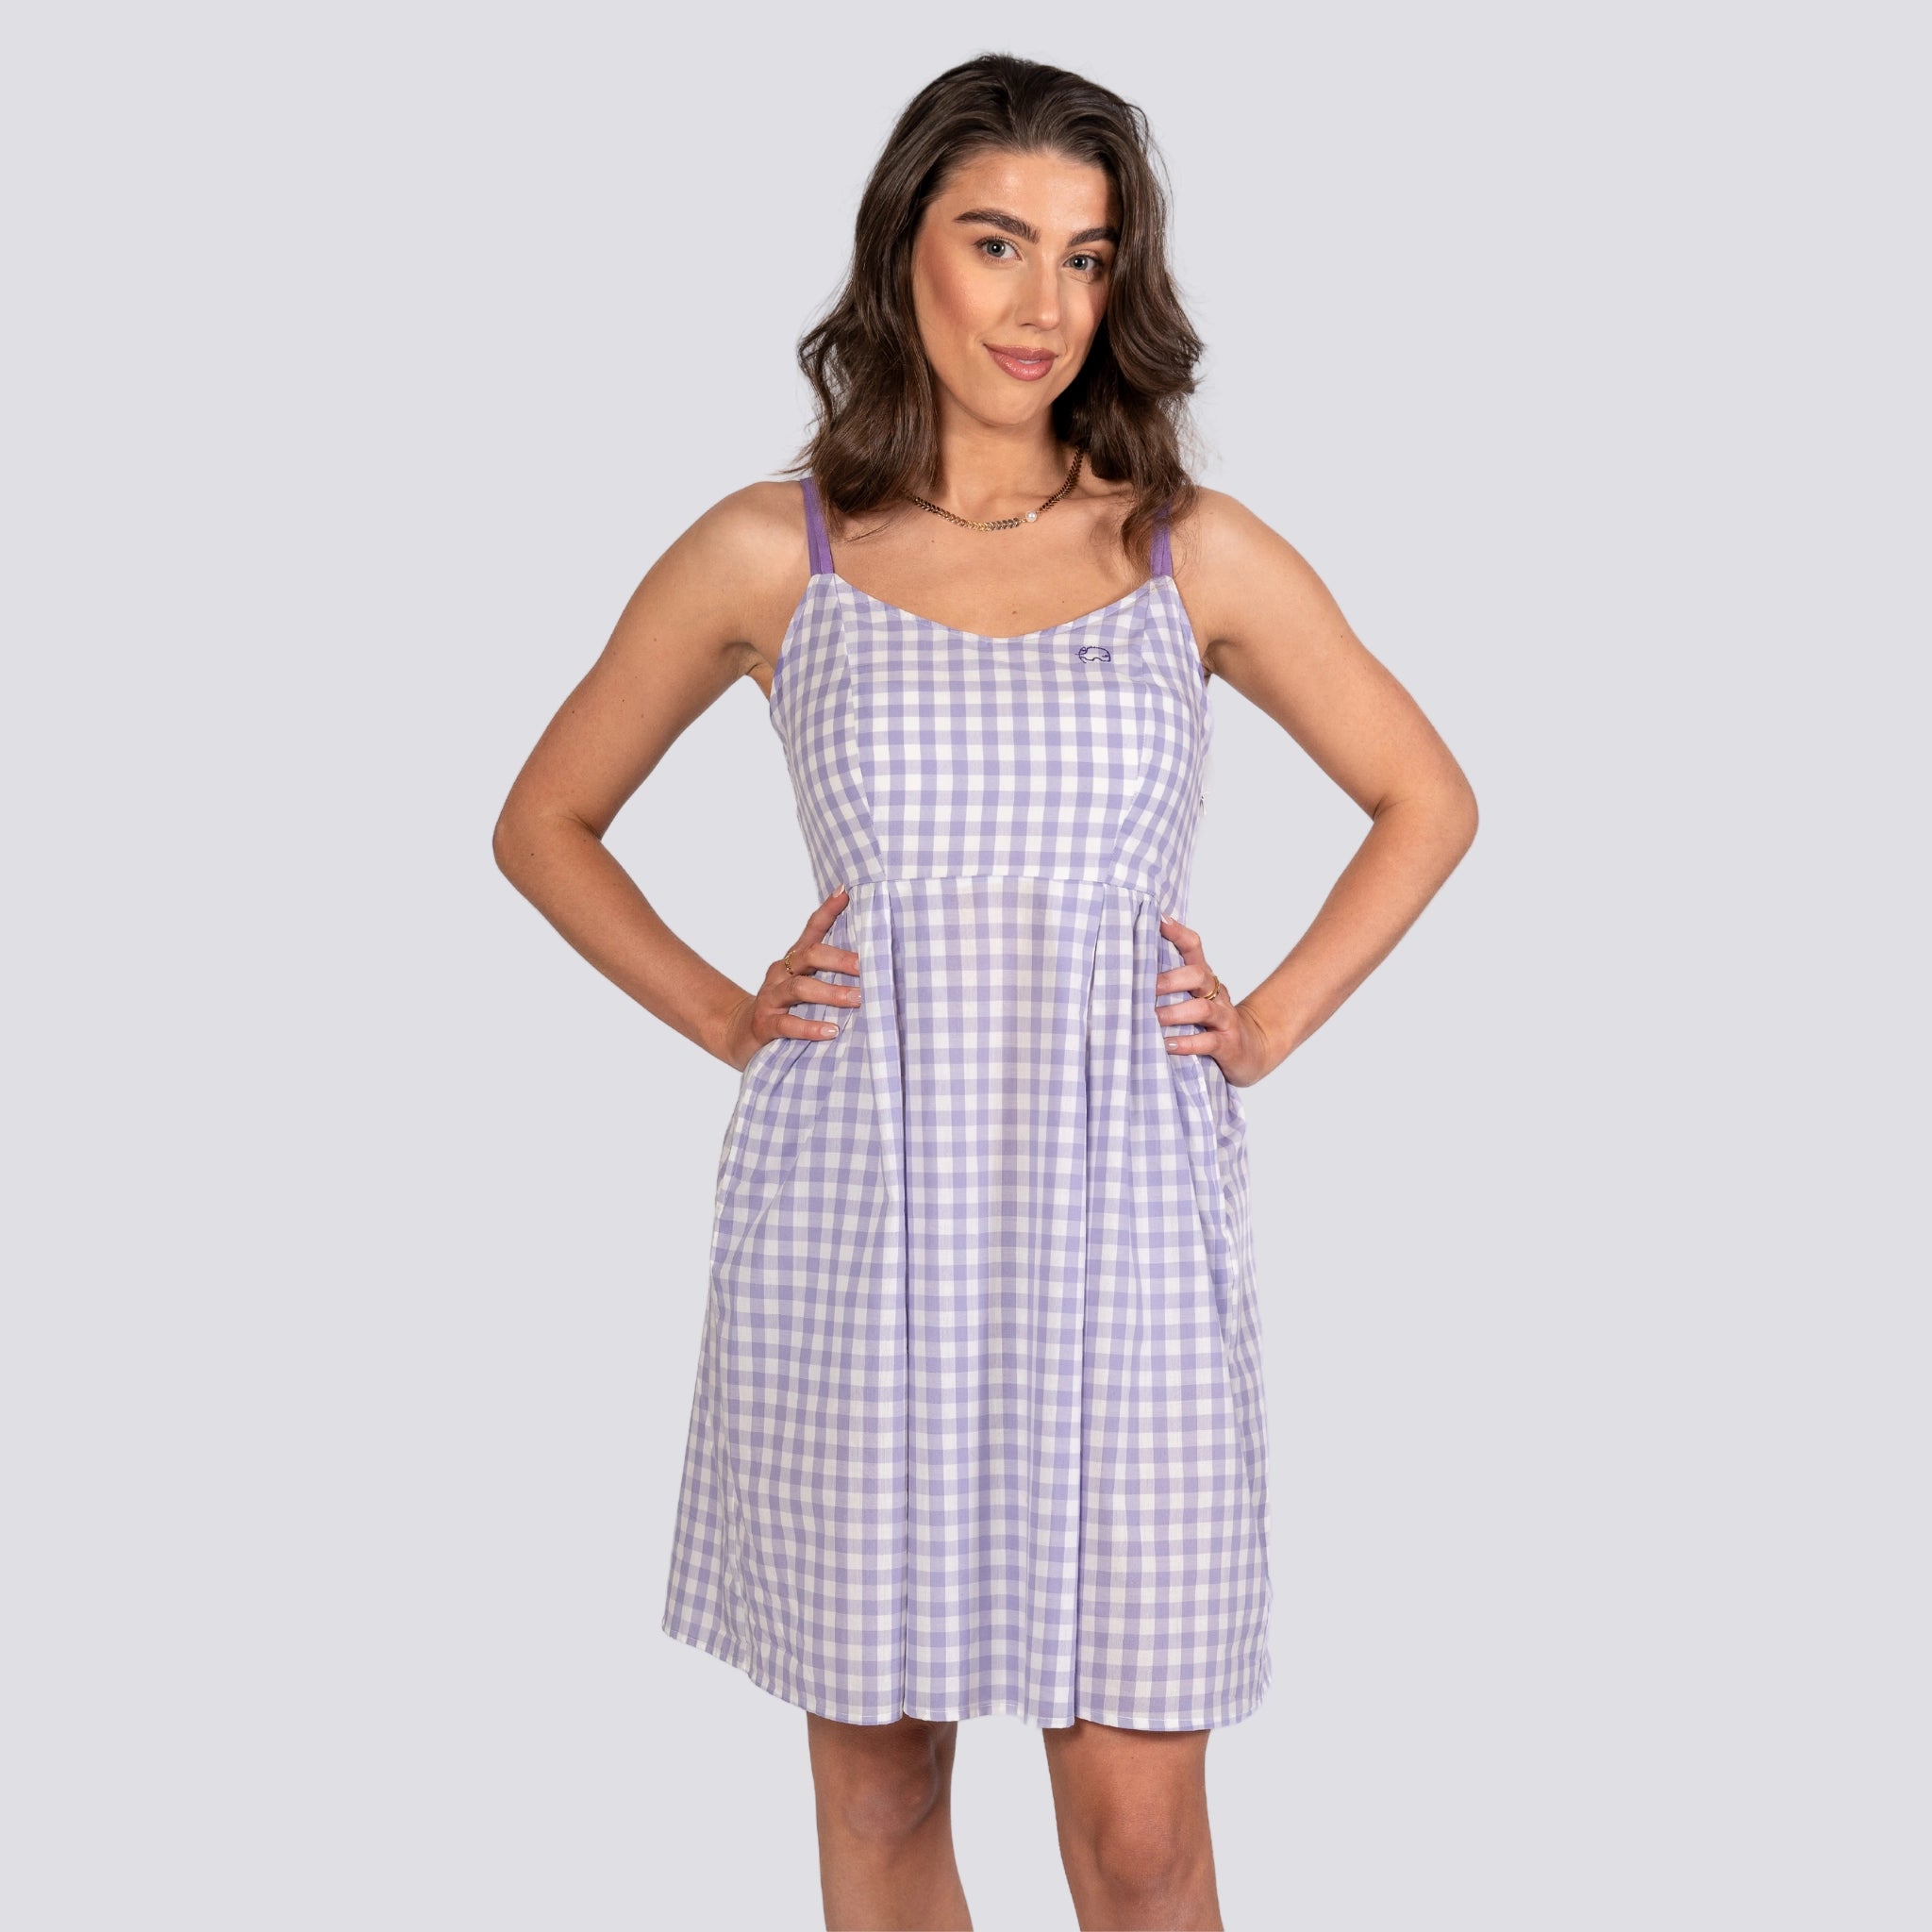 A woman in a Karee lavender plaid cotton mini dress stands with hands on her hips, looking slightly to the side against a gray background.